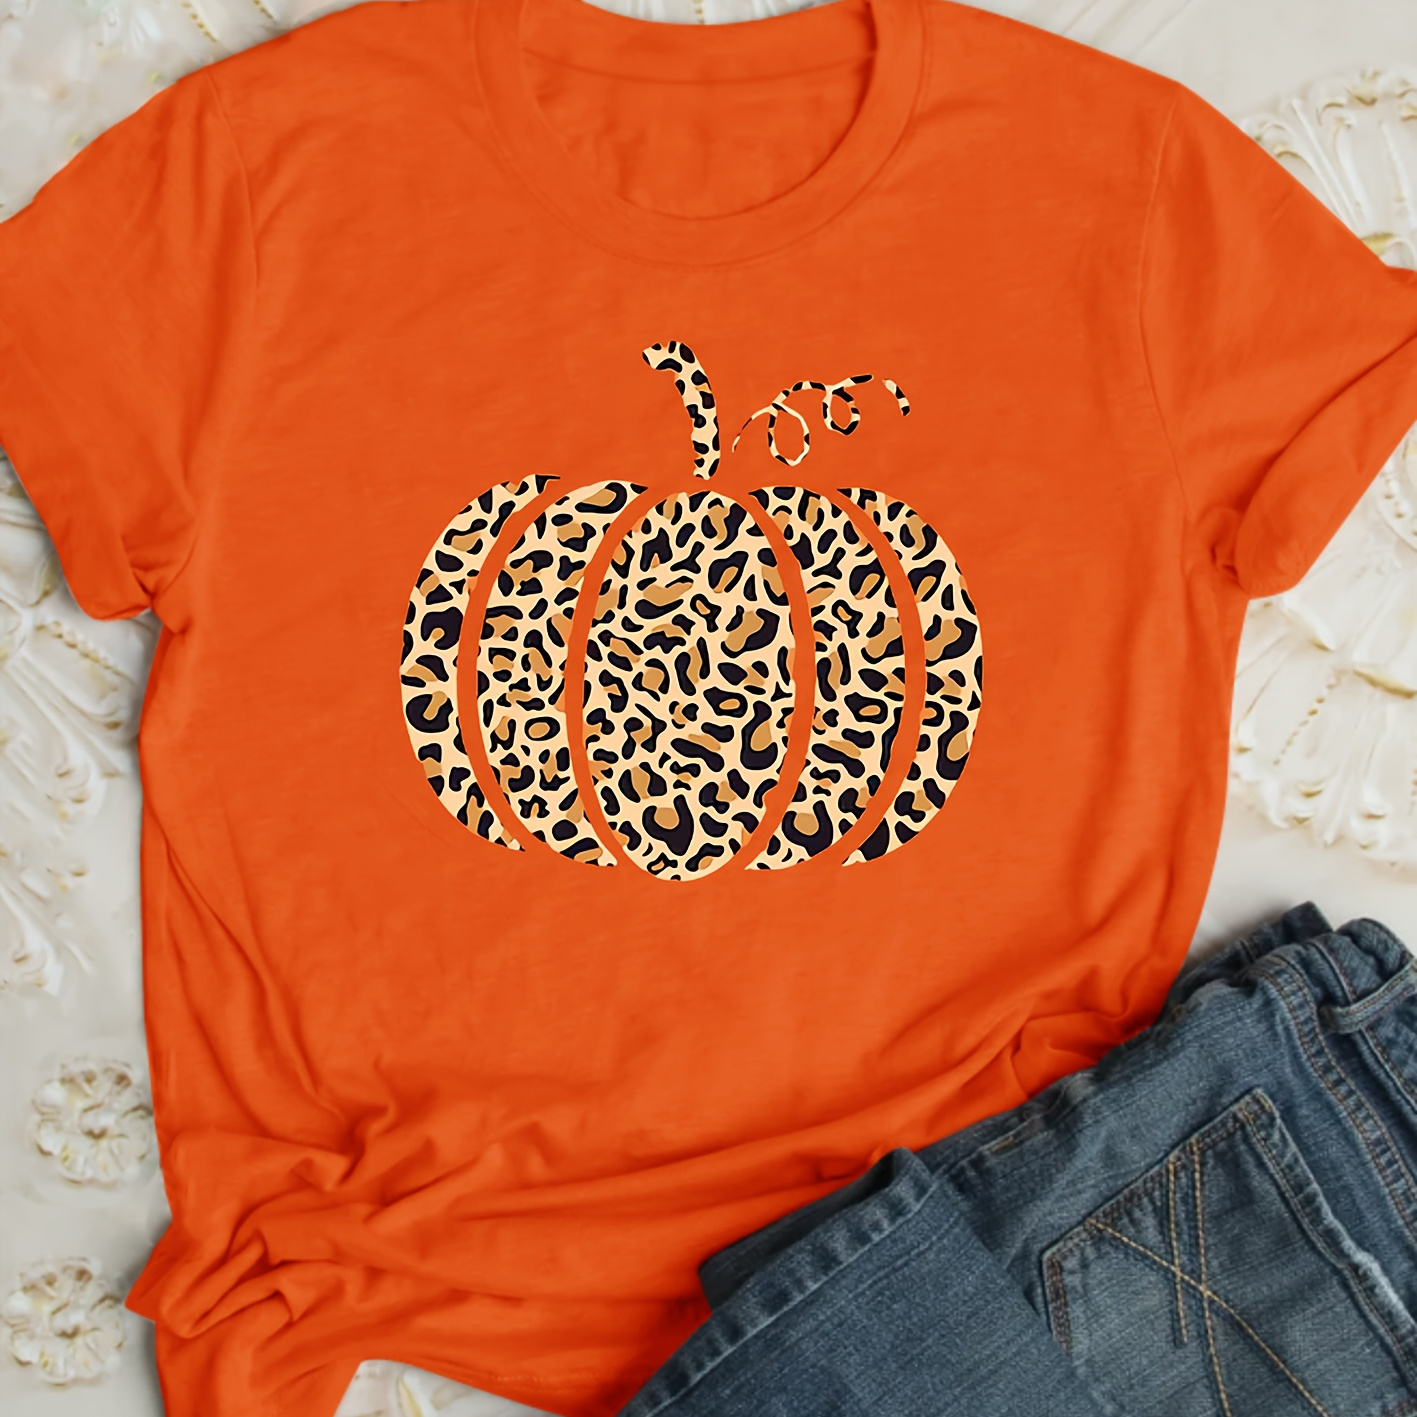 

Women's Casual Short Sleeve Round Neck T-shirt, Vintage Halloween Leopard Pumpkin Print, Fashion Sporty Tee Top, Relaxed Fit